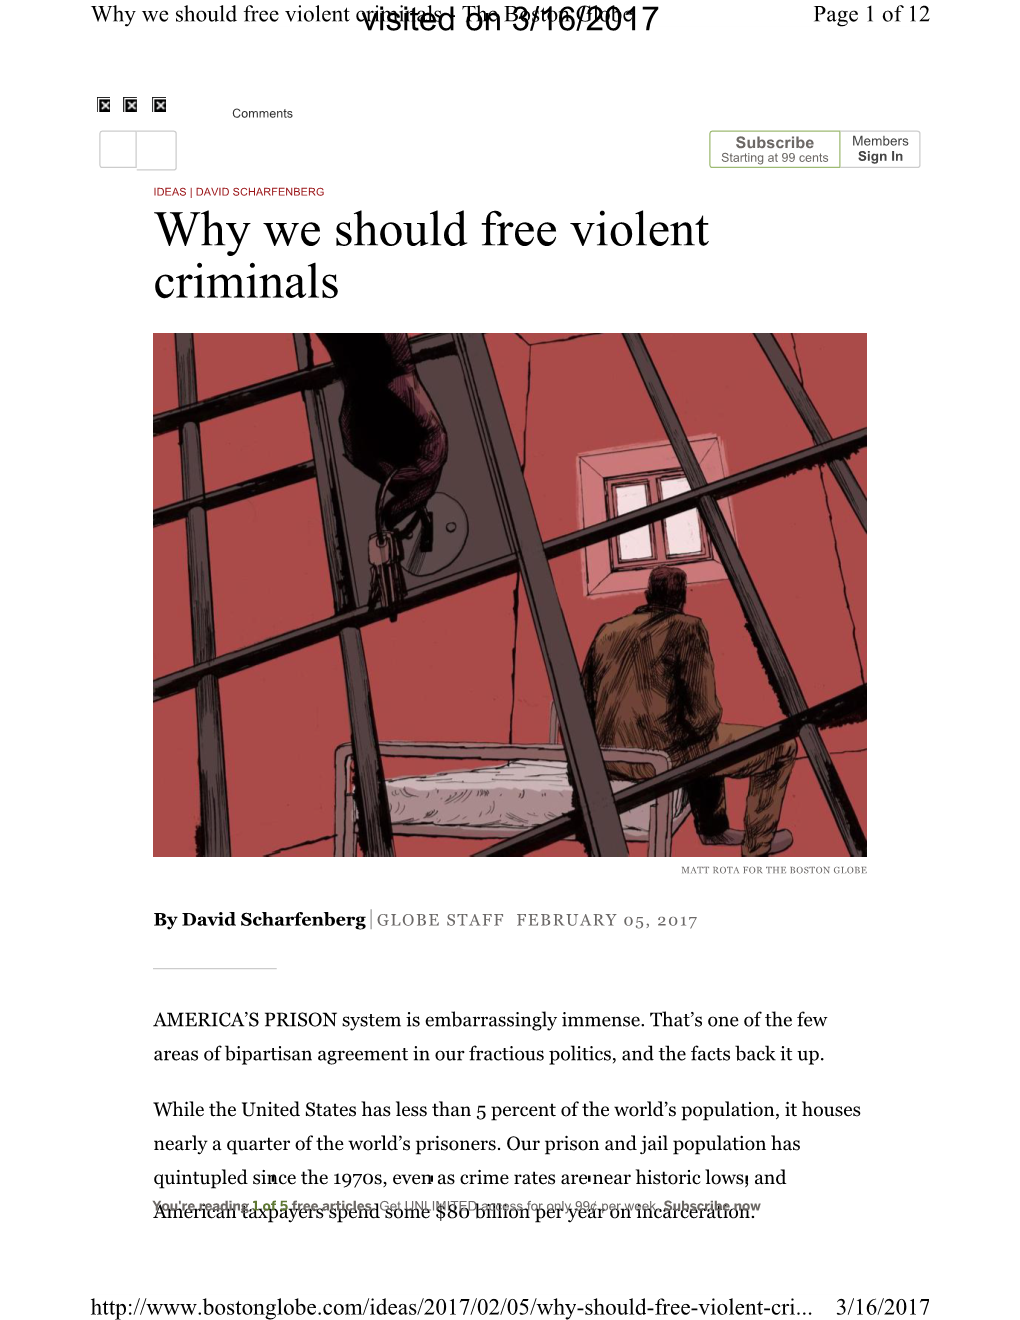 Why We Should Free Violent Criminalsvisited - Theon Boston3/16/2017 Globe Page 1 of 12